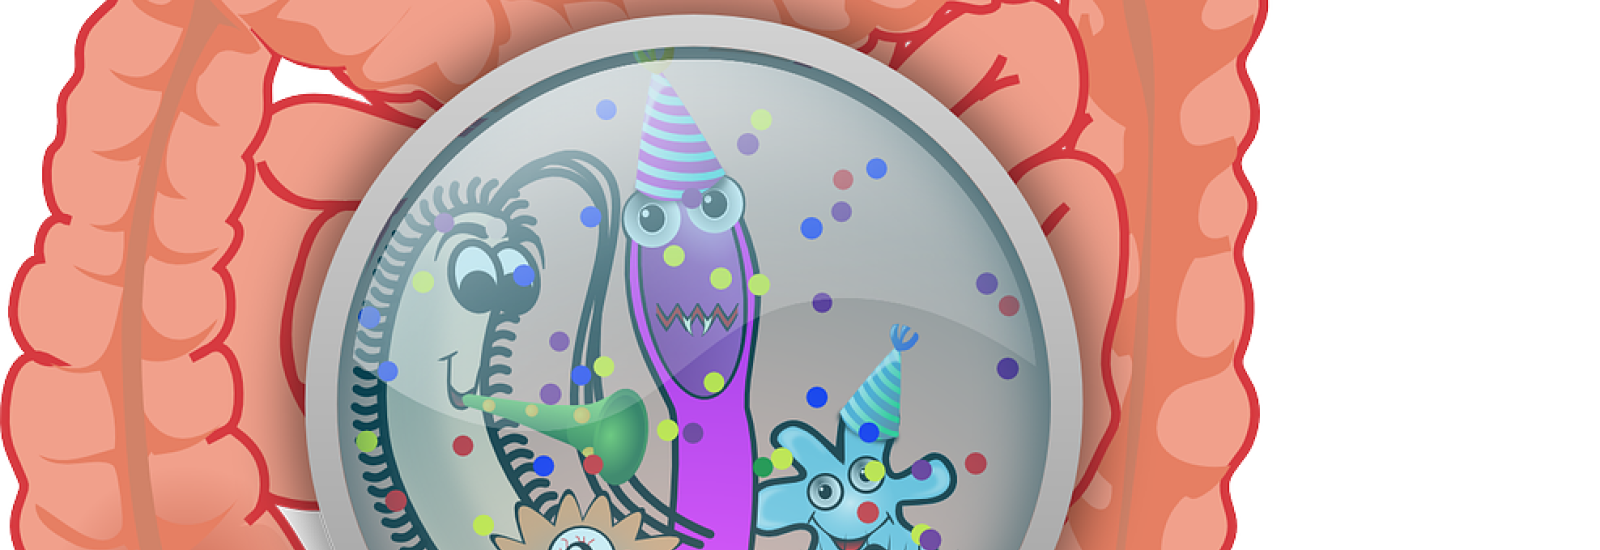 A cartoon image of the human gut, with a magnifying glass, showing various bacteria and organisms there.